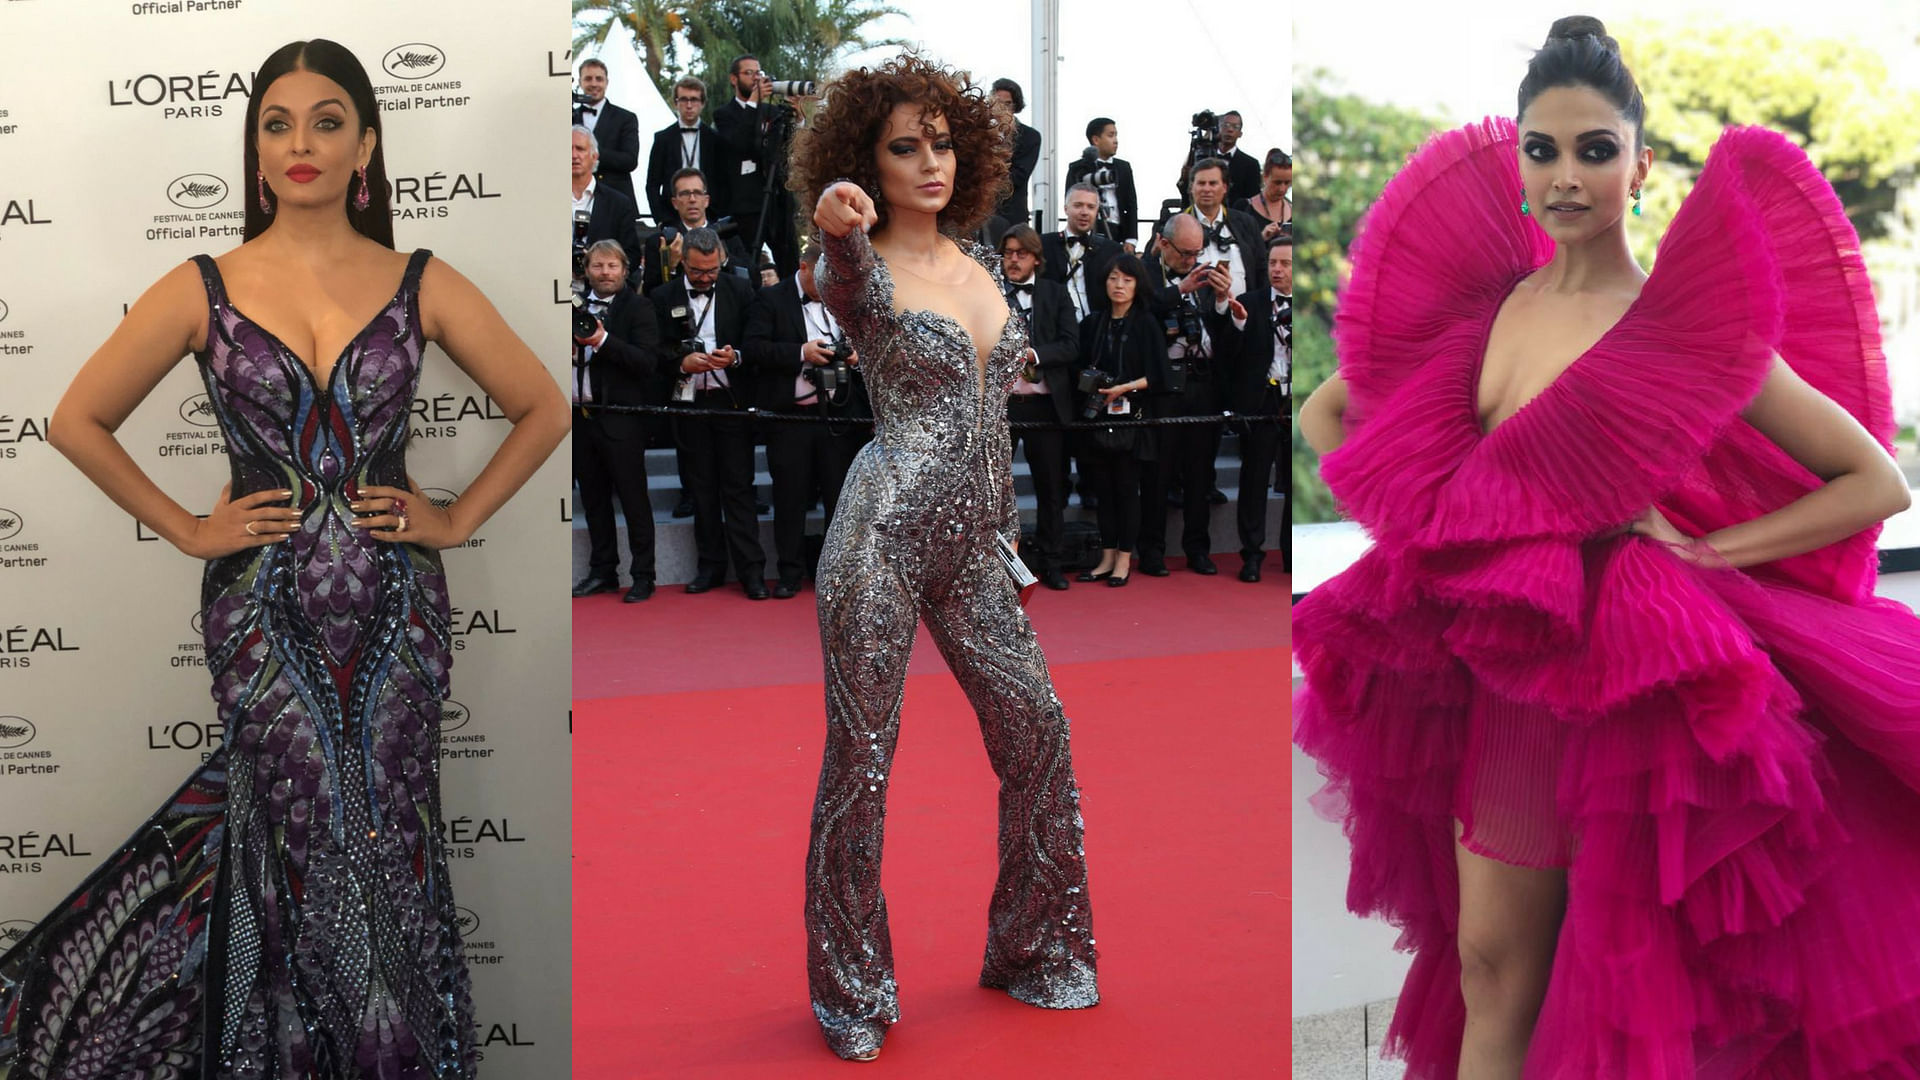 Aishwarya Rai Bachchan, Kangana Ranaut, Deepika Padukone turn out to be major disappointments for India at Cannes as far as gender equality goes.&nbsp;